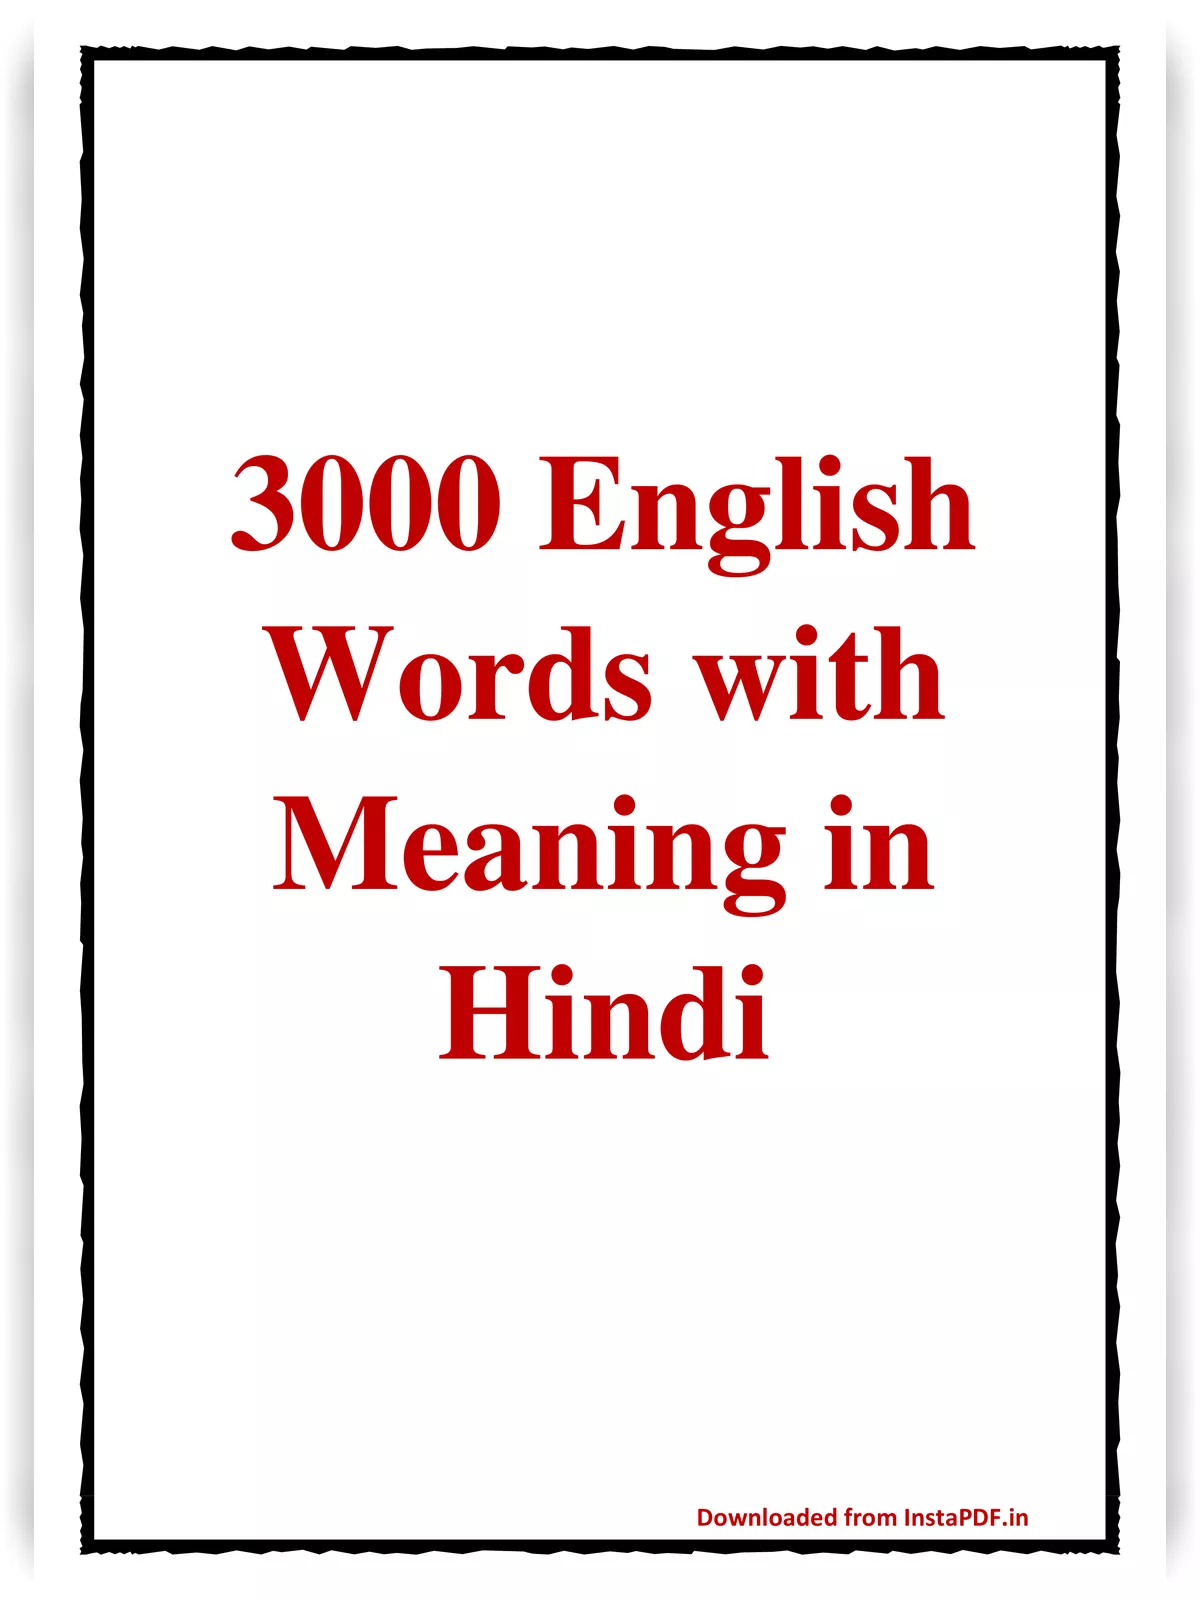 3000 English Words with Meaning in Hindi